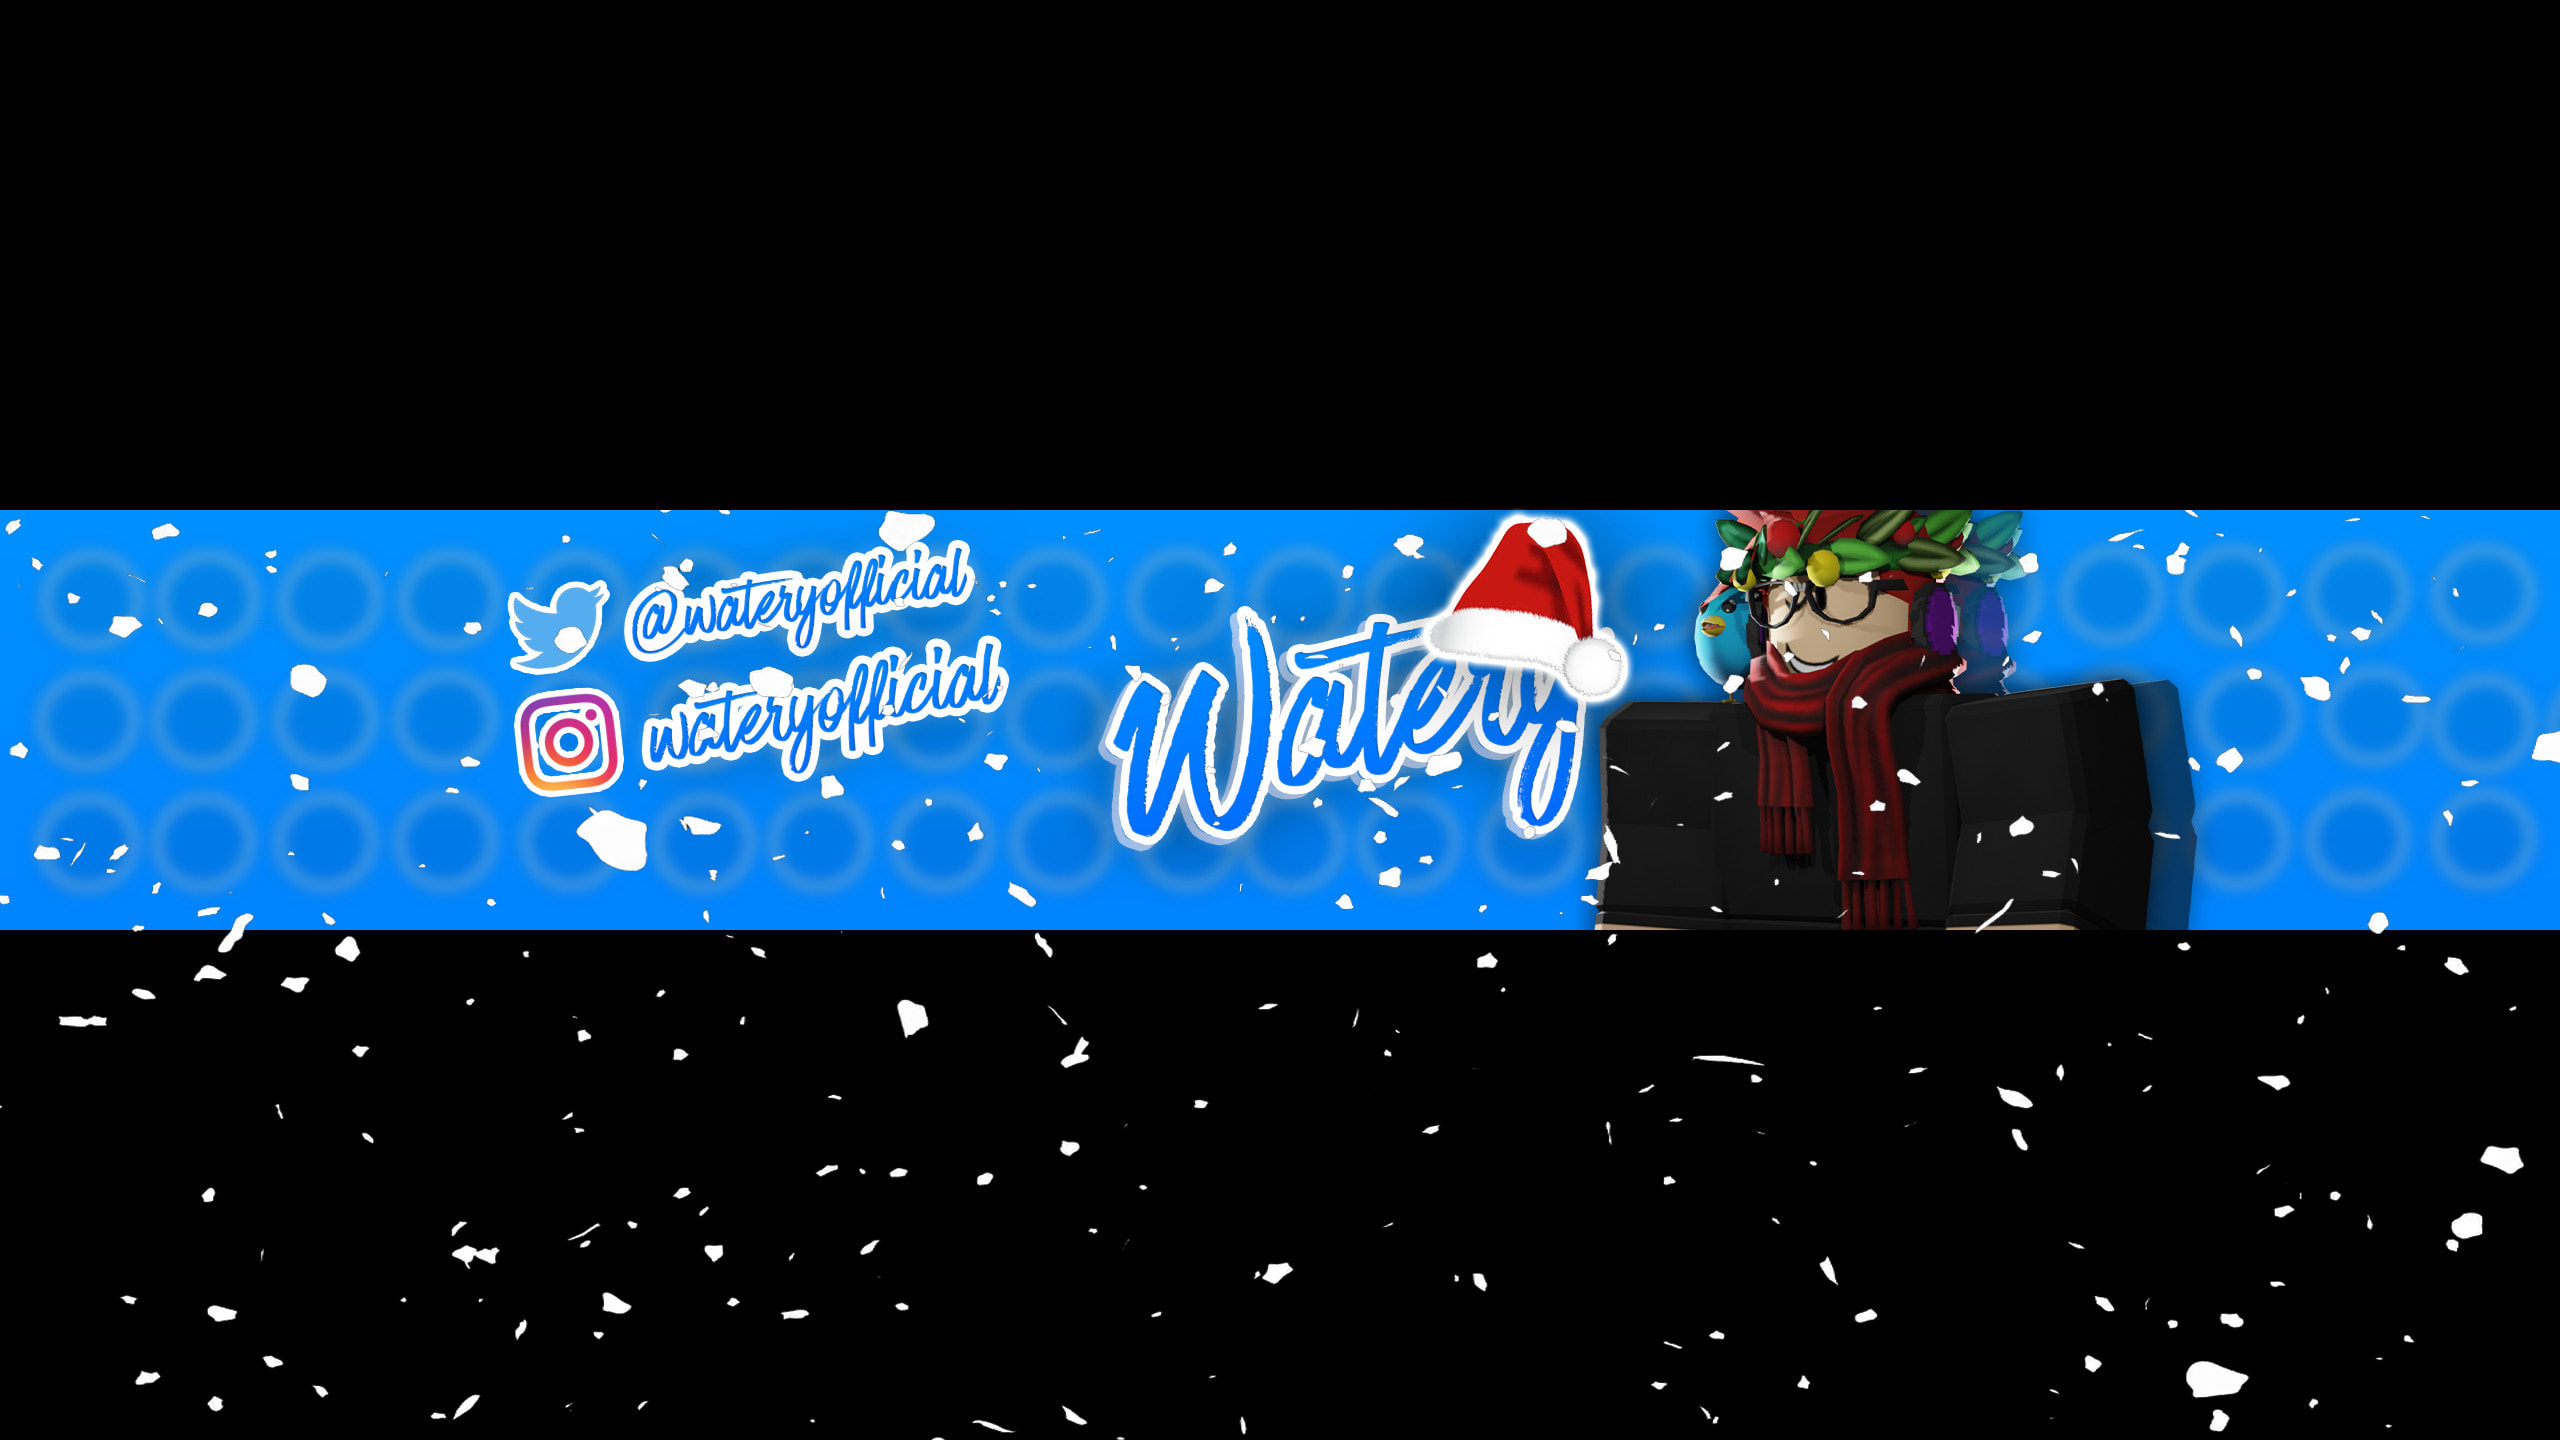 Make A Simple Banner For All Social Medias By Wateryyt - roblox background 2560x1440